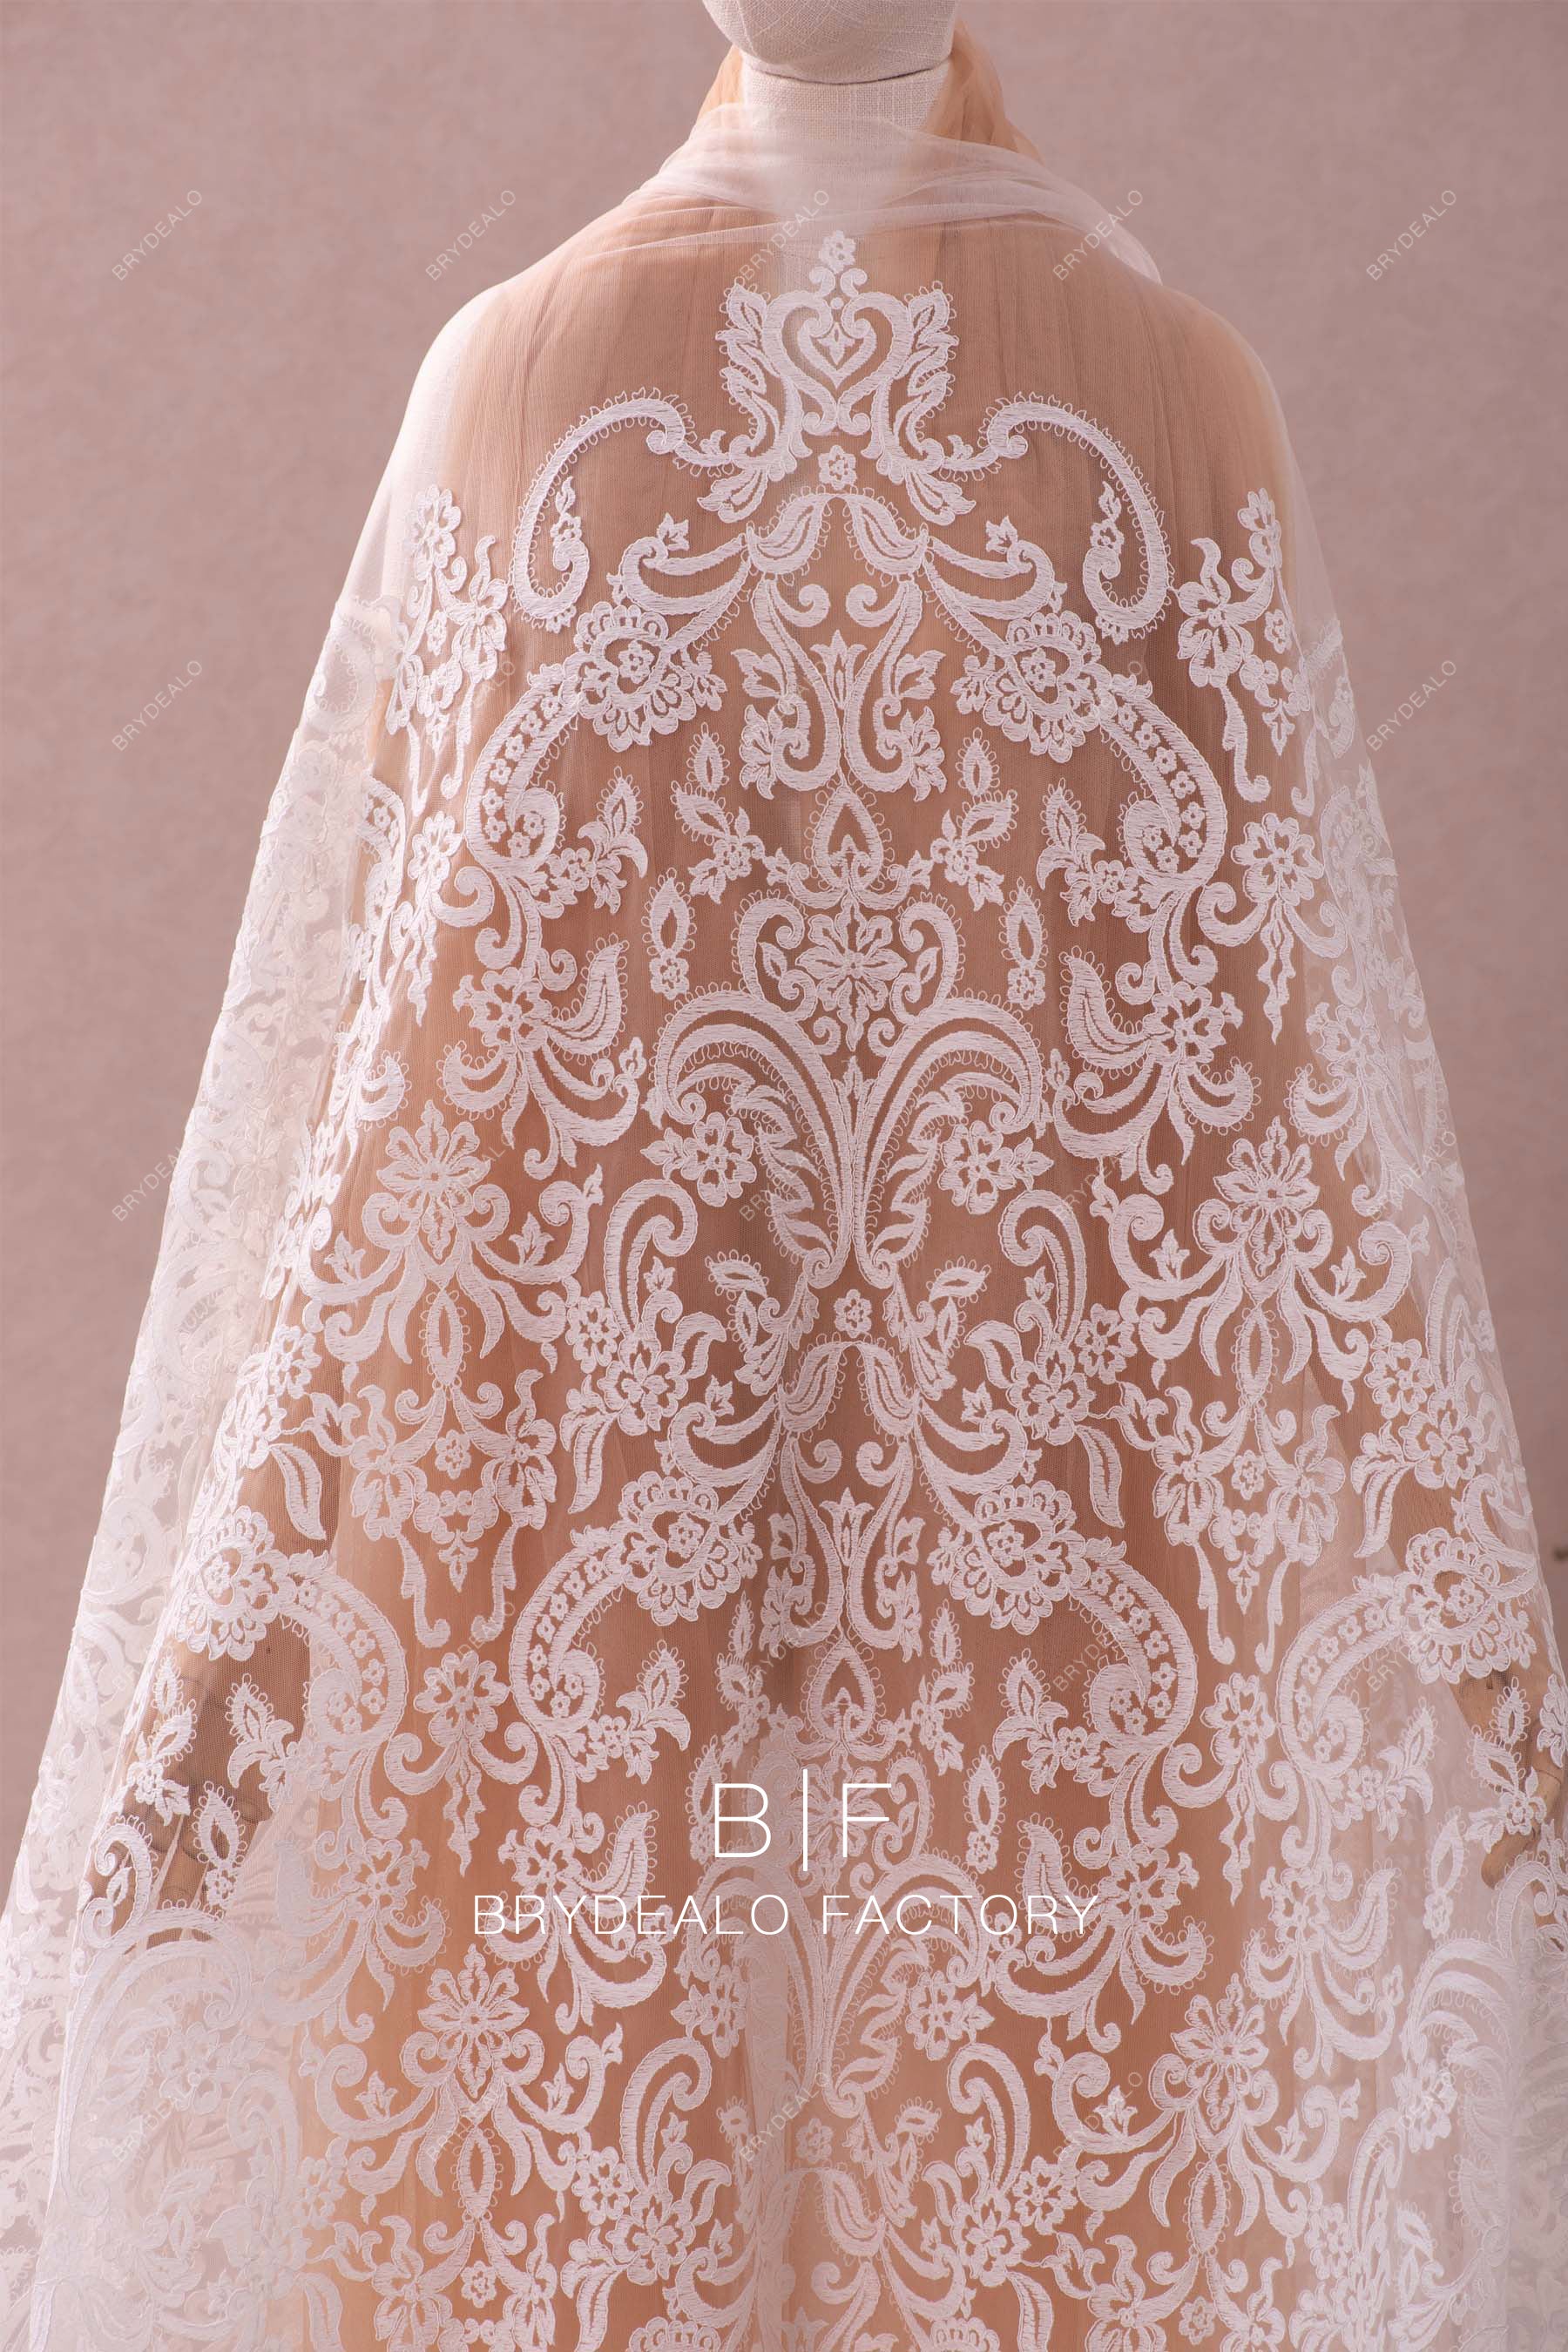 Symmetrical Embroidery Abstract Pattern Lace Fabric Online